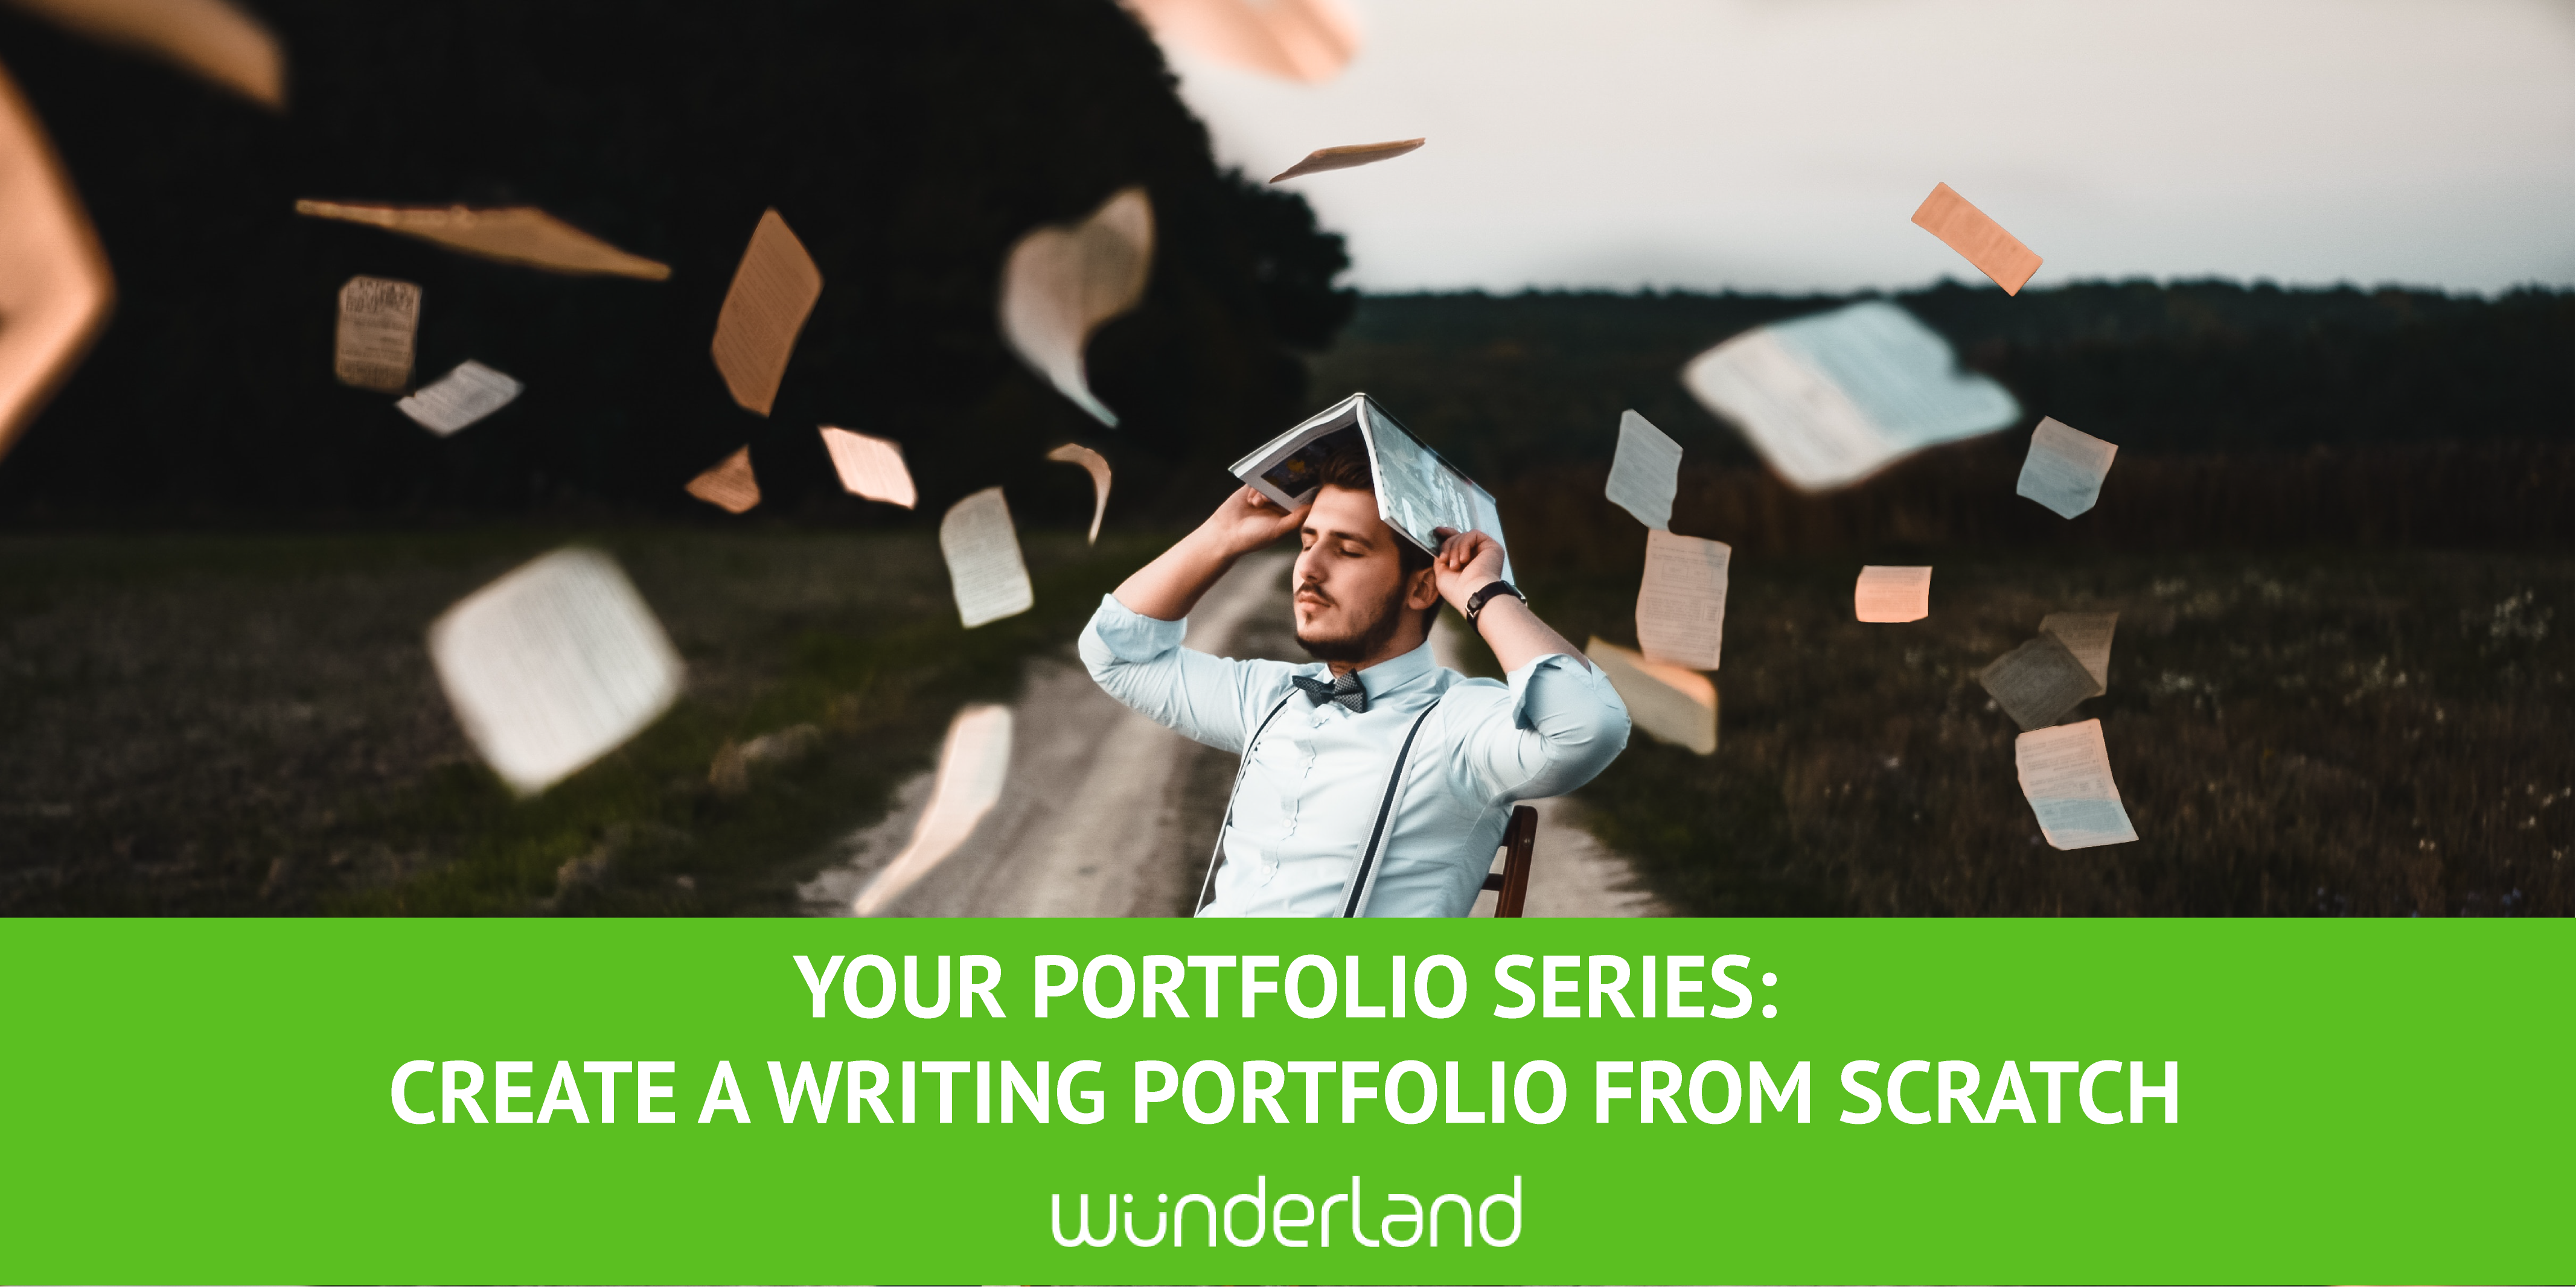 Creating a Writing Portfolio from Scratch